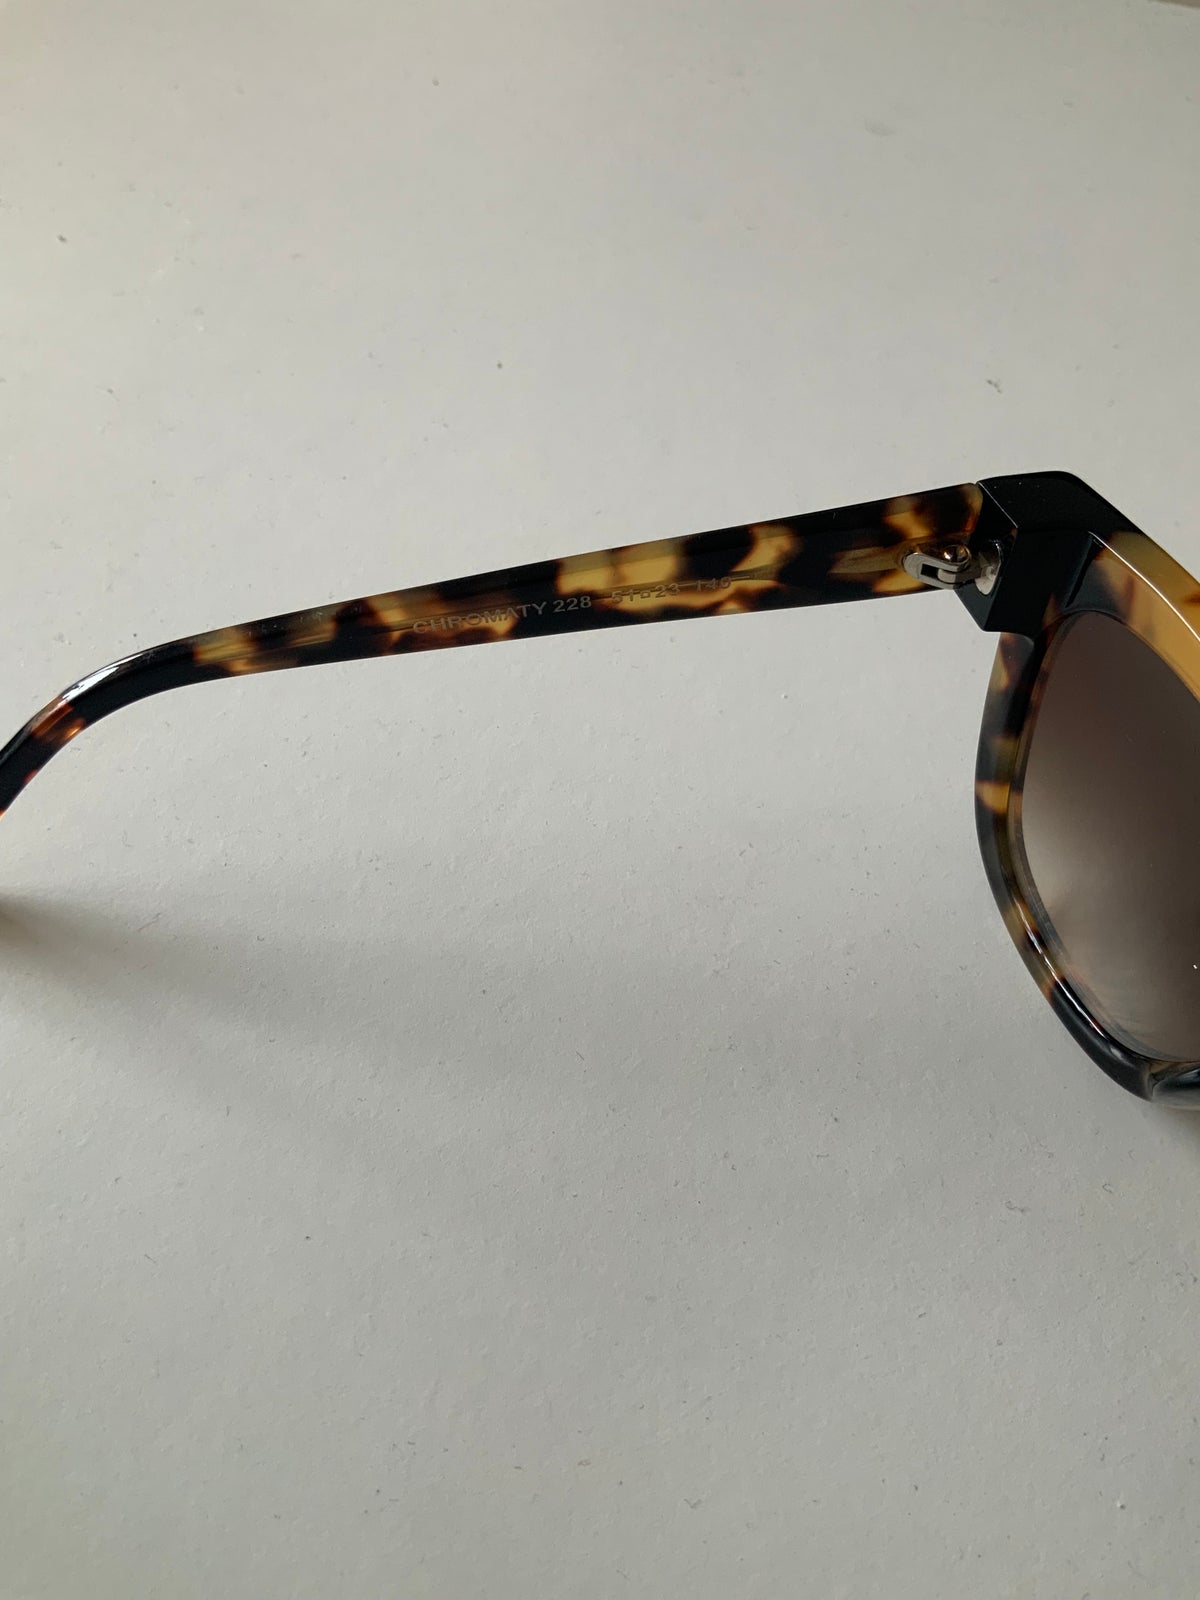 Solbriller dame, Thierry Lasry